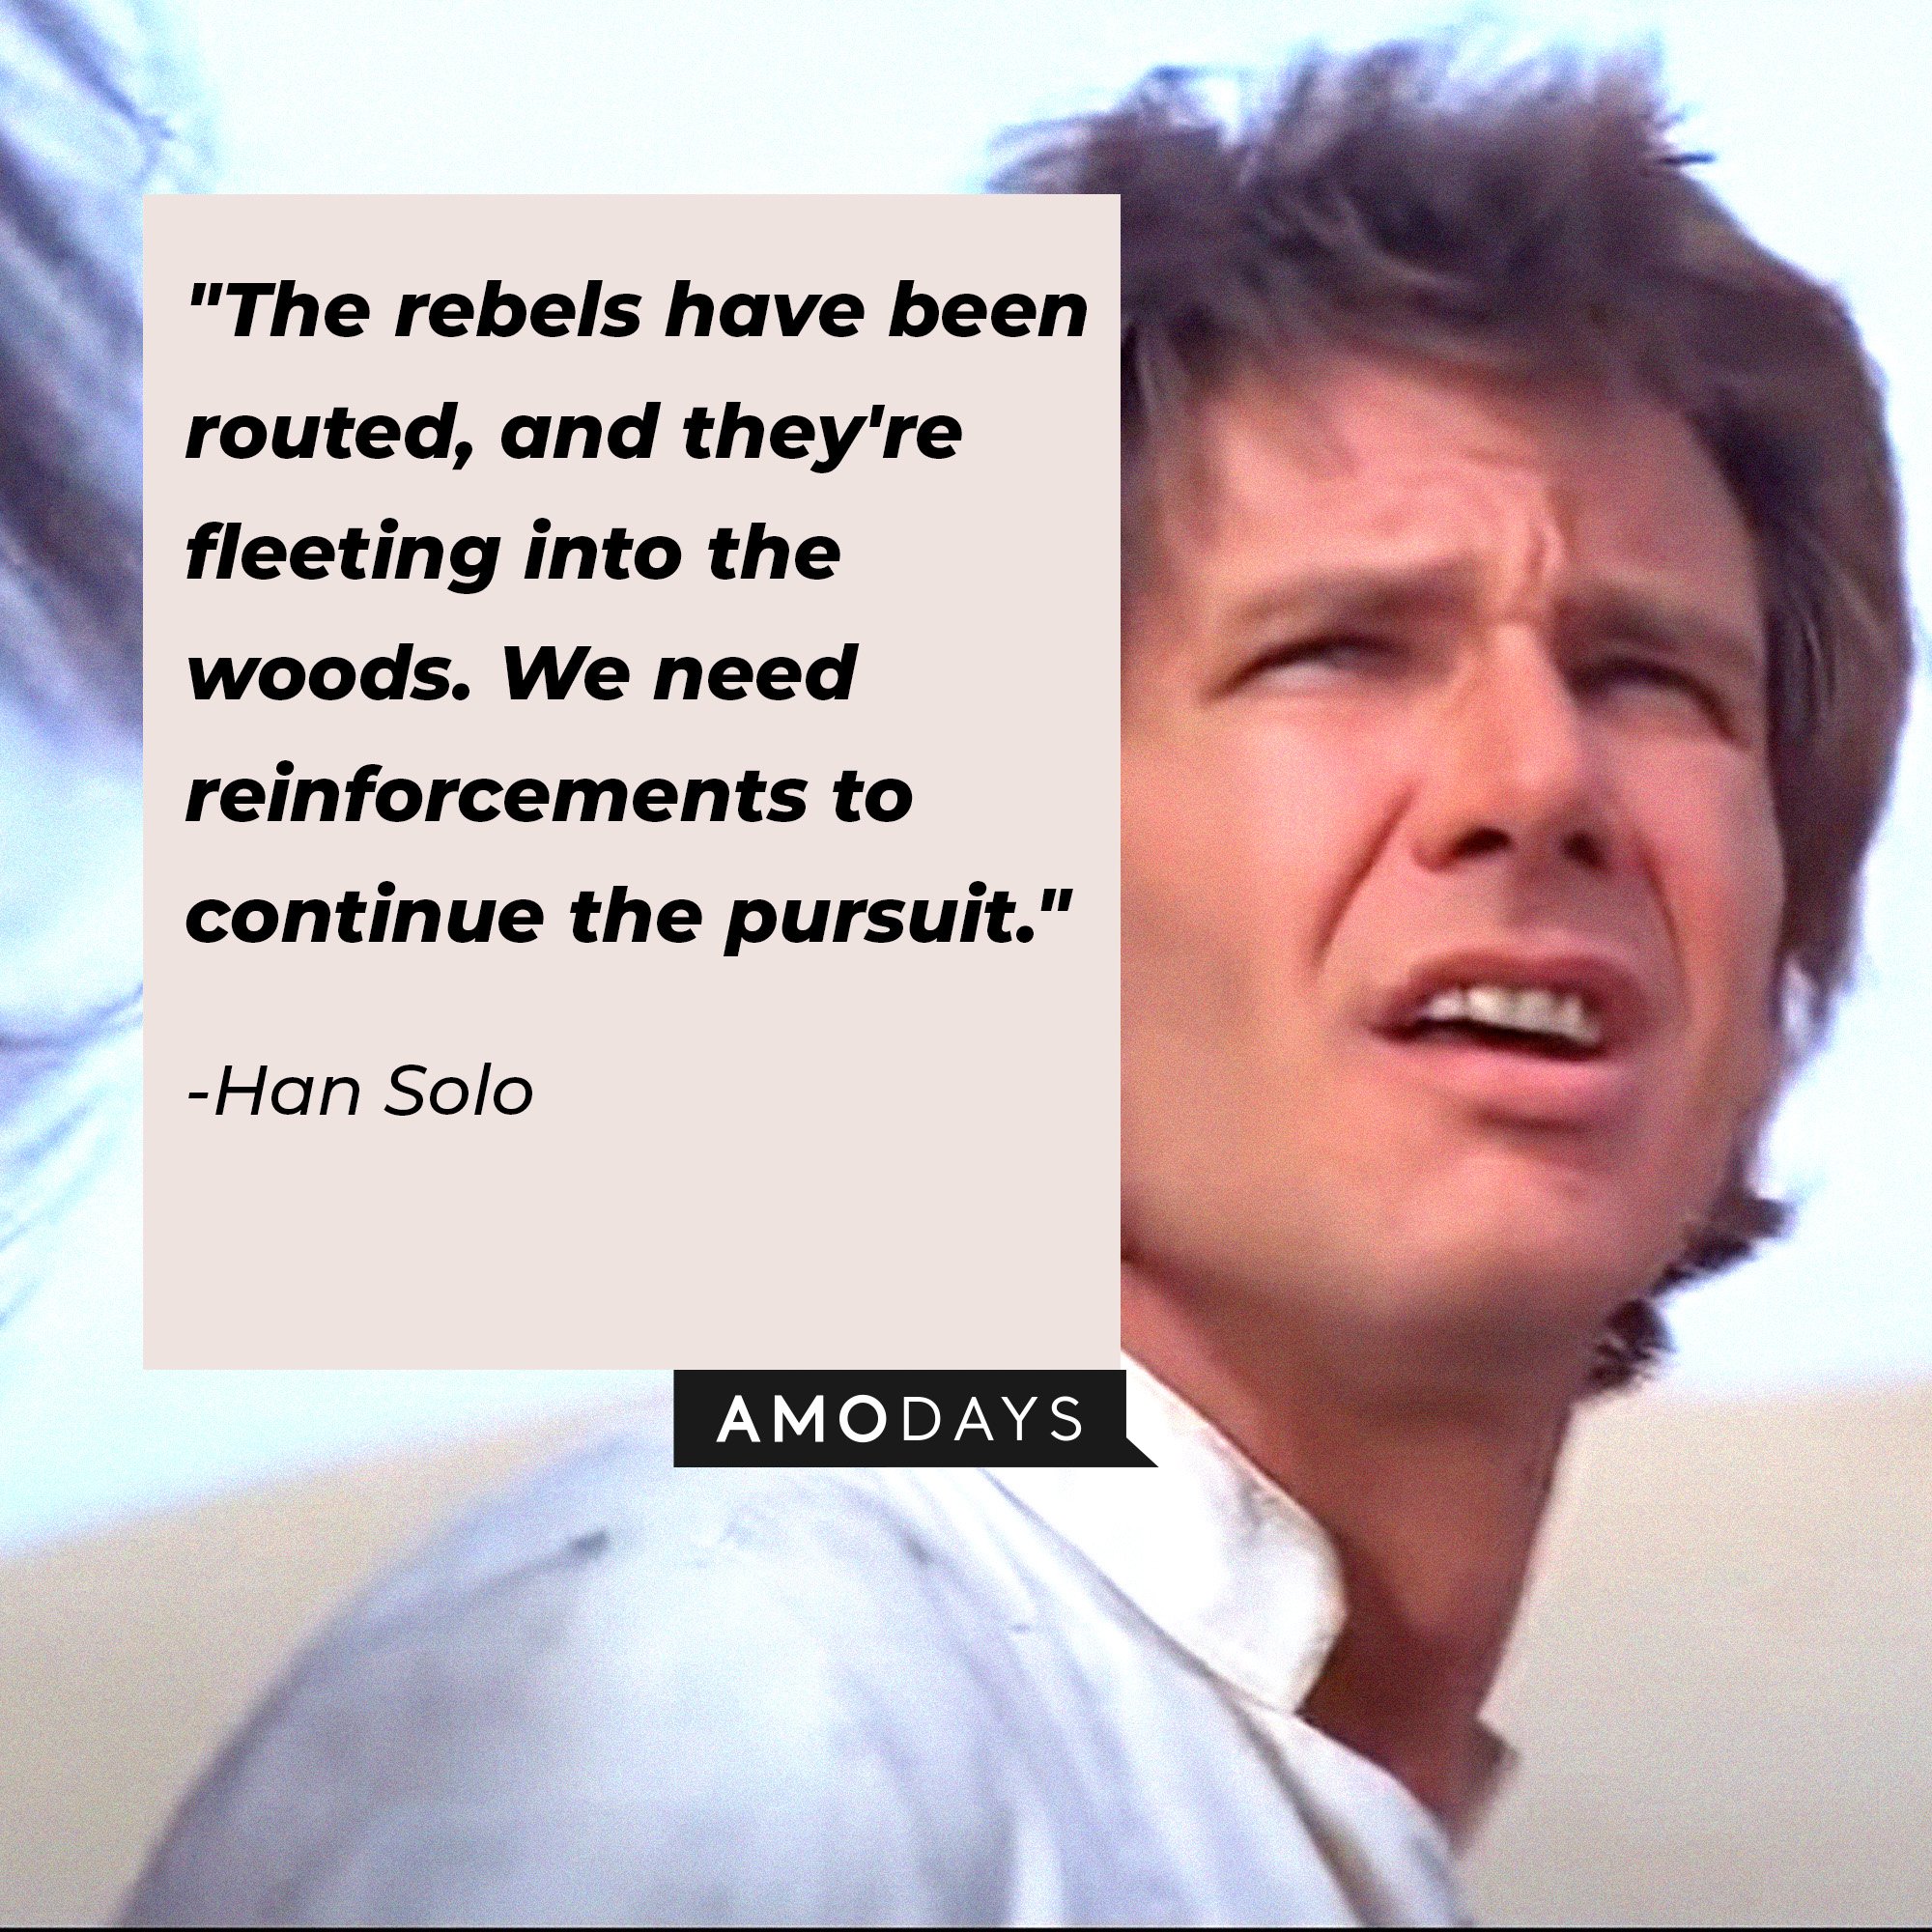 Han Solo’s quote: "The rebels have been routed, and they're fleeting into the woods. We need reinforcements to continue the pursuit." | Image: AmoDays